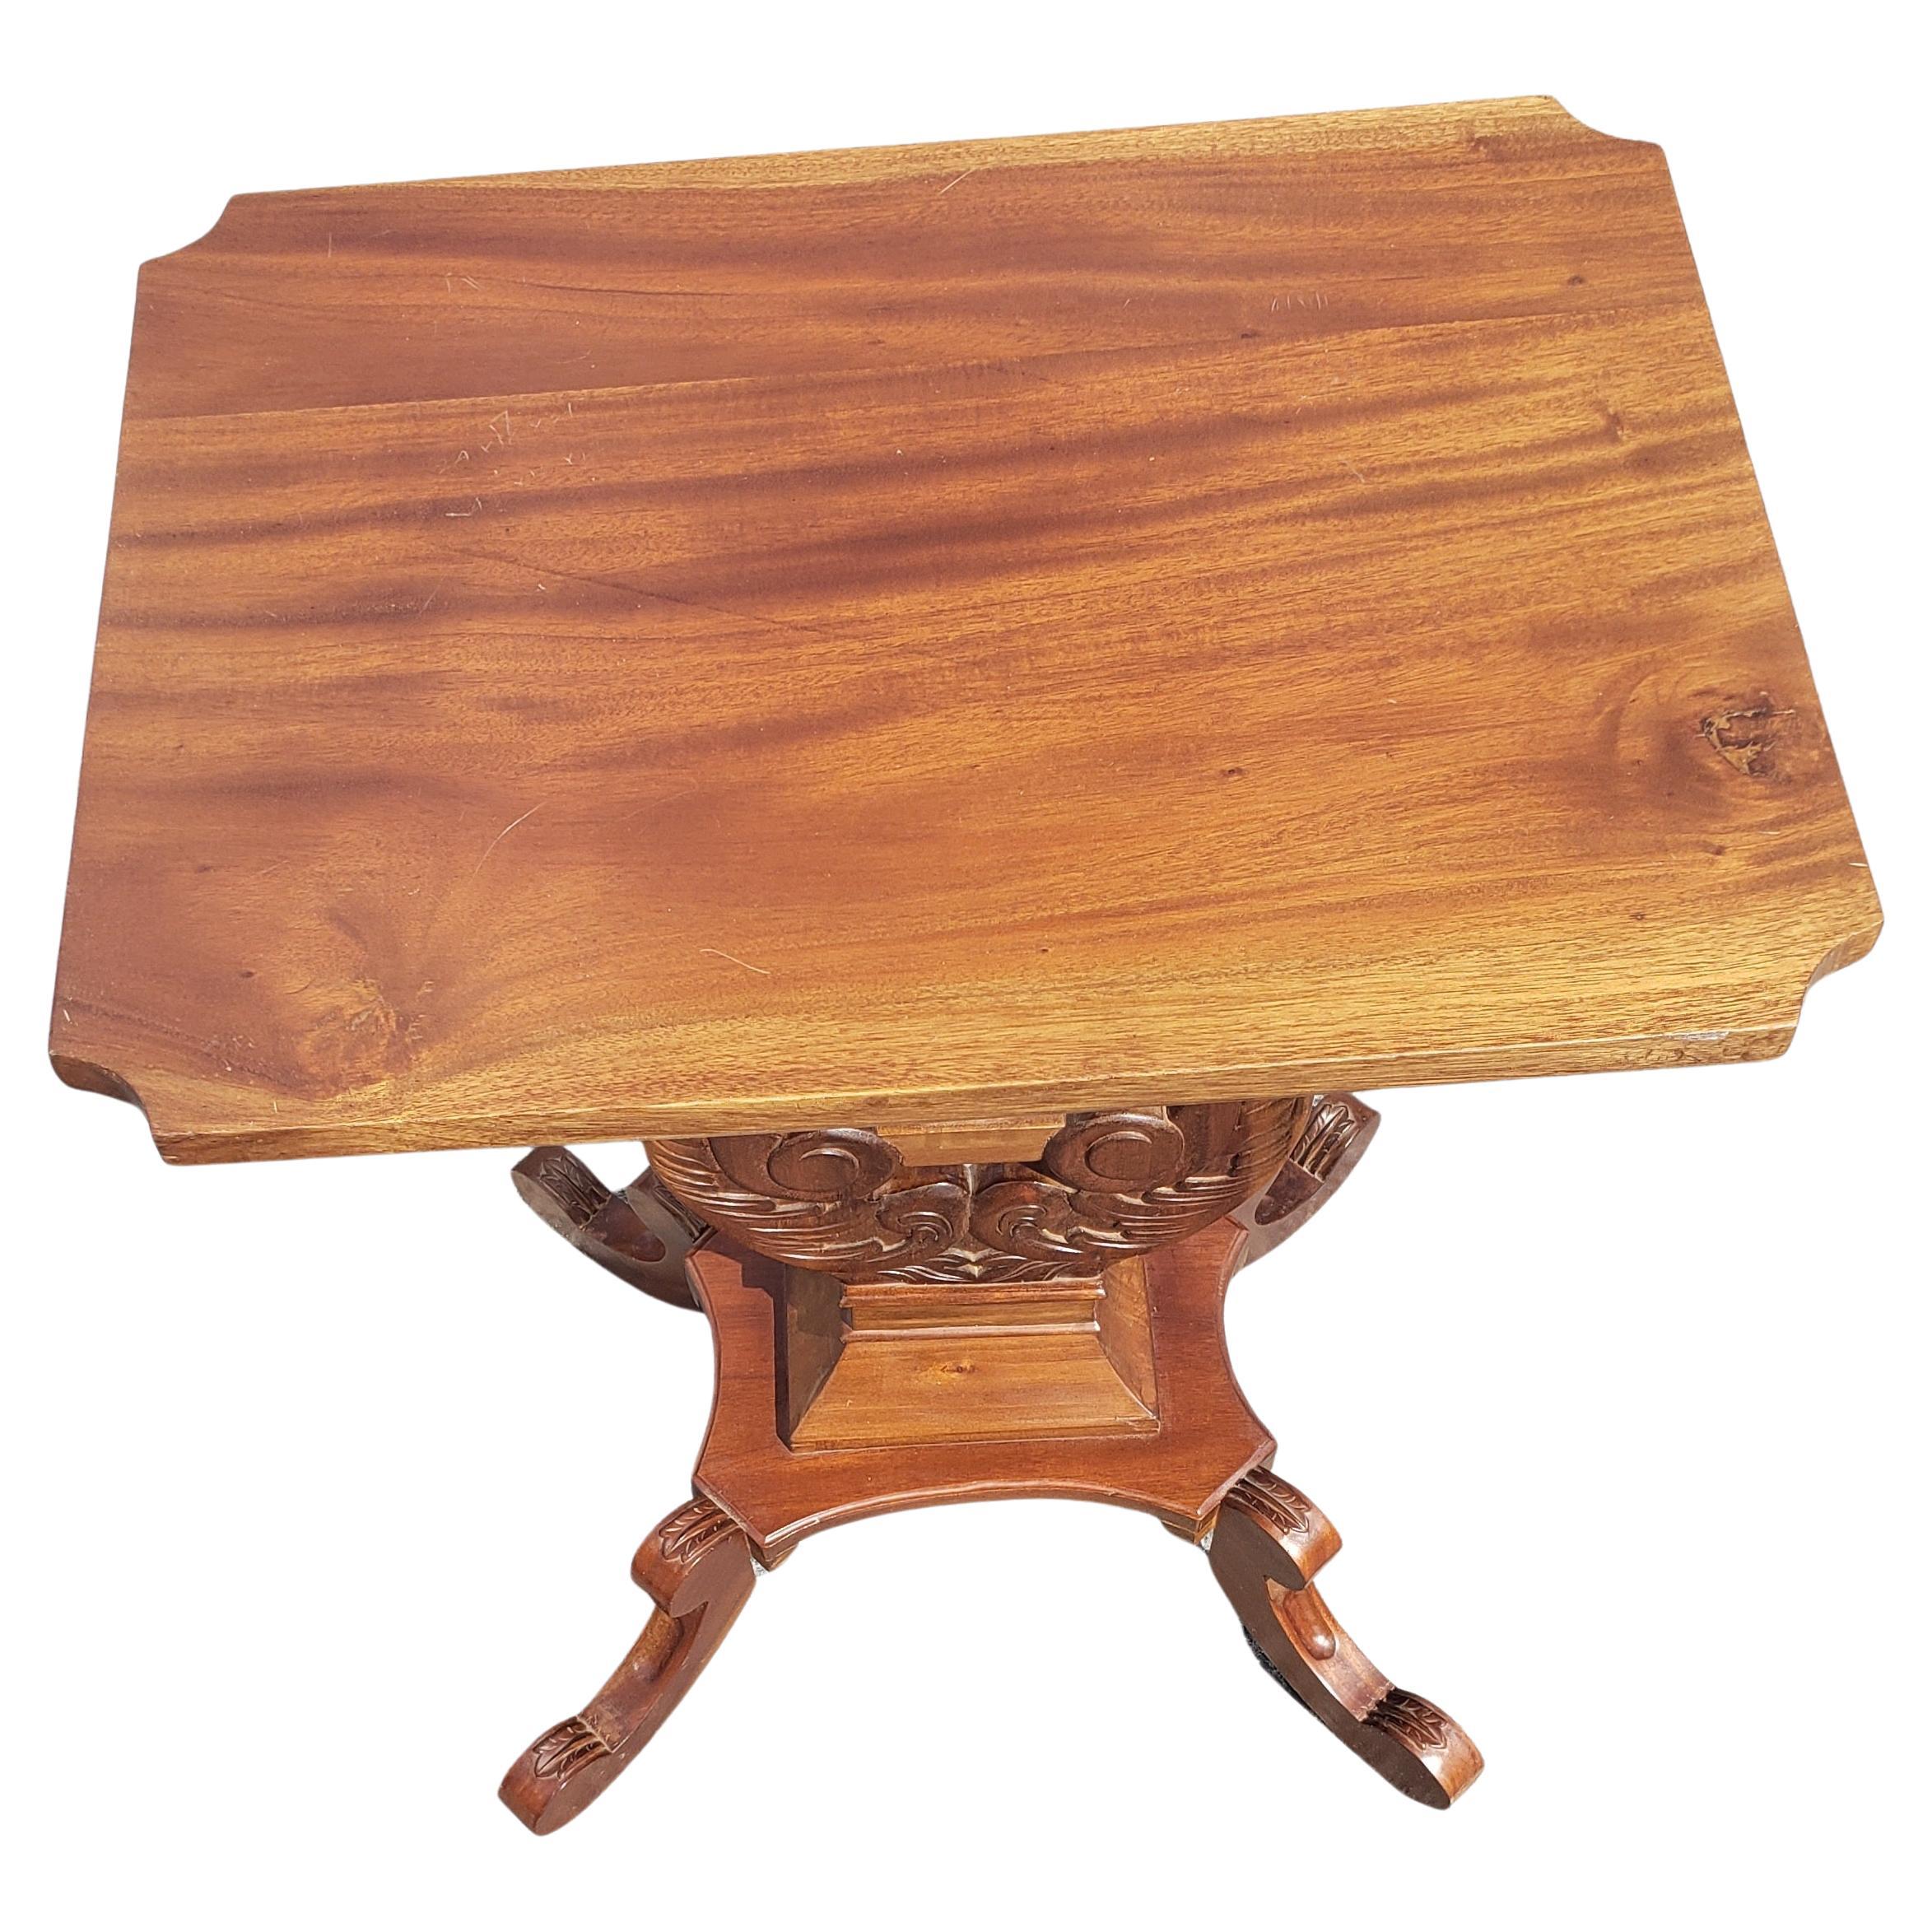 Woodwork American Empire Mahogany Rectangular Lyre Base Side Table, C 1940s For Sale